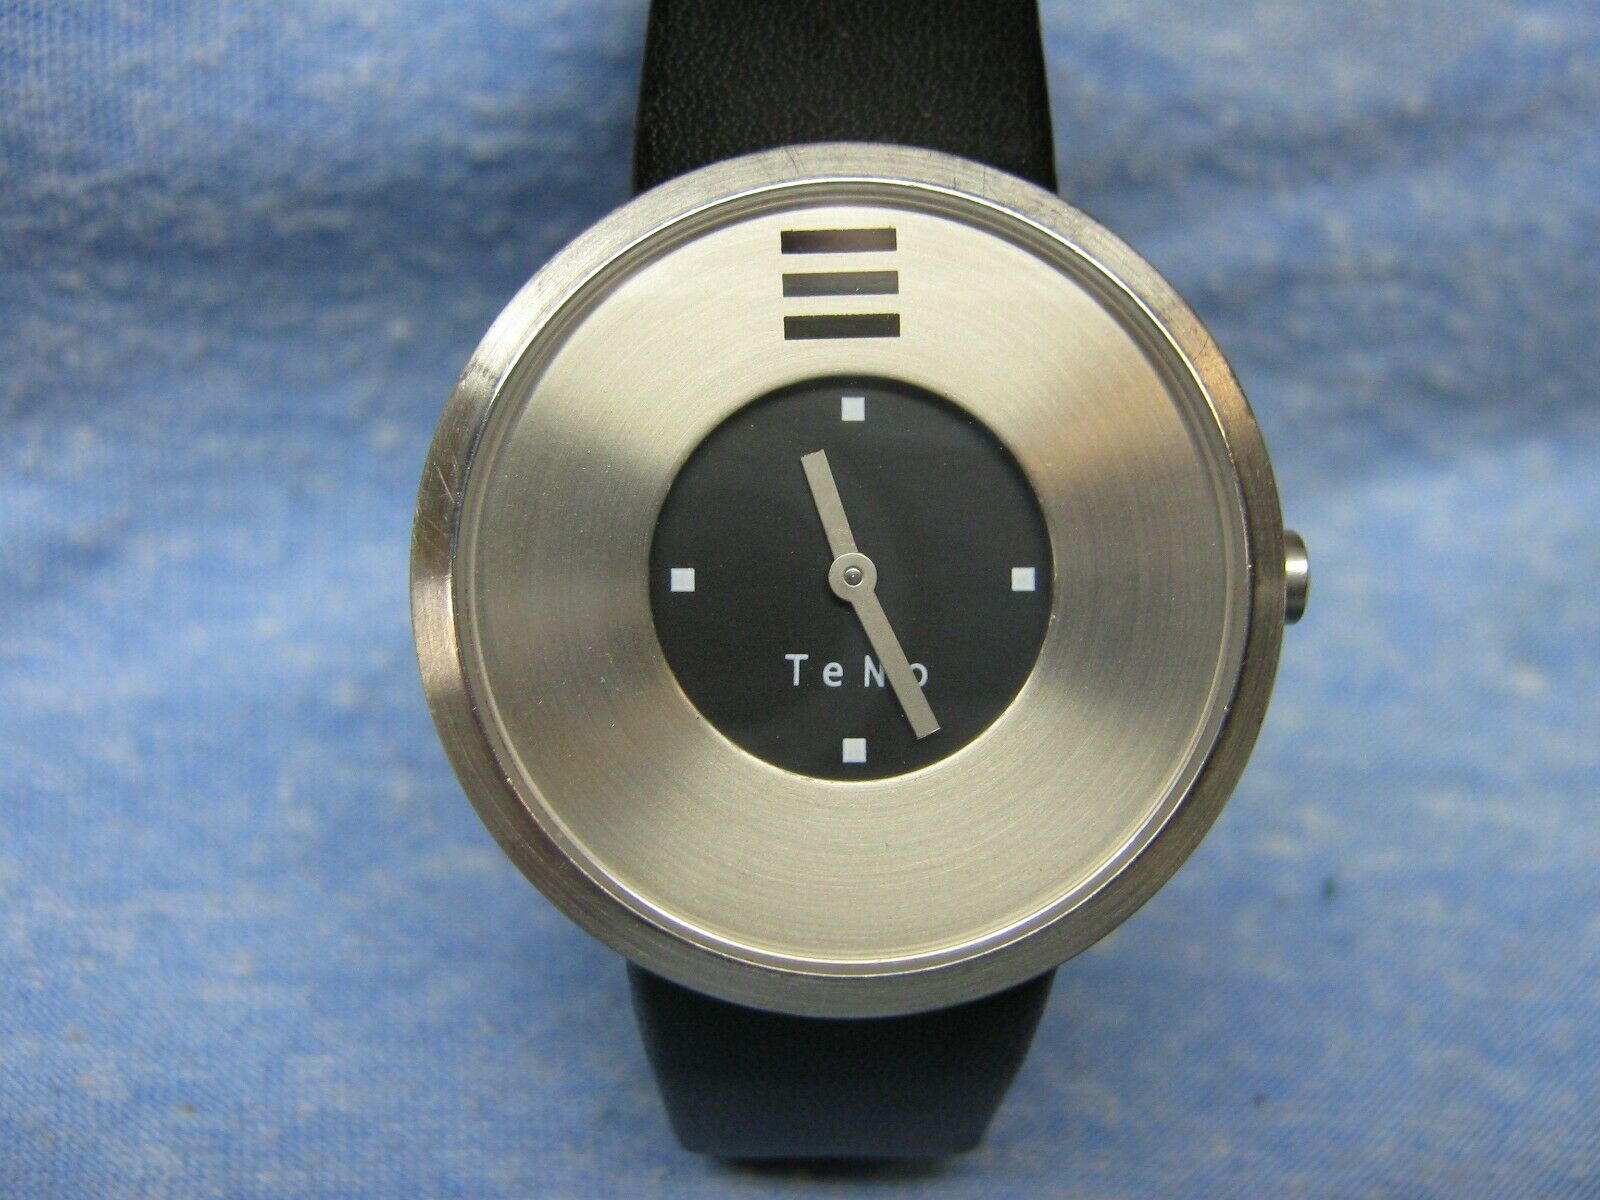 Teno Stainless Steel Watches